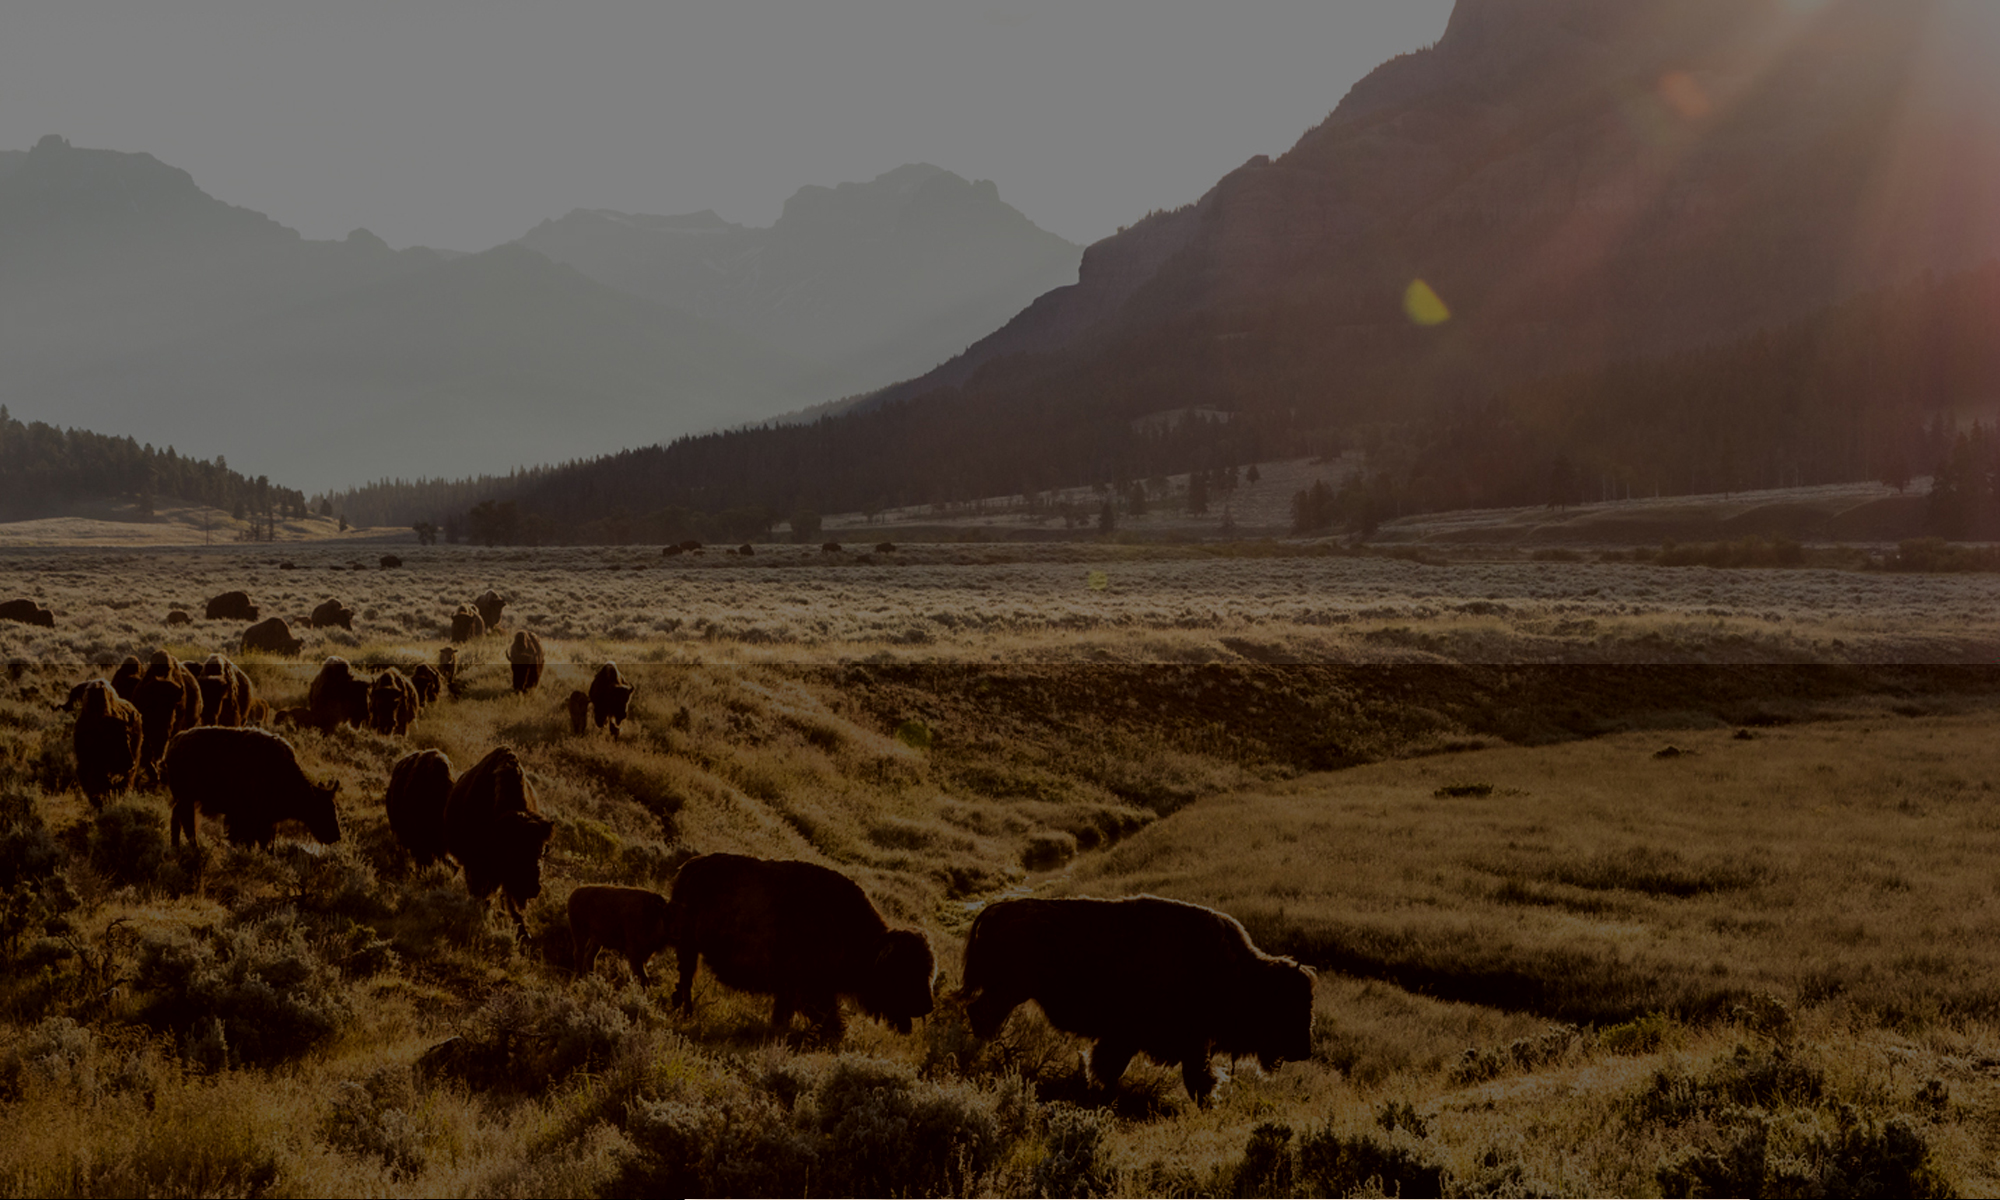 Bison grazing in a beautiful mountain pasture in Yellowstone National Park.